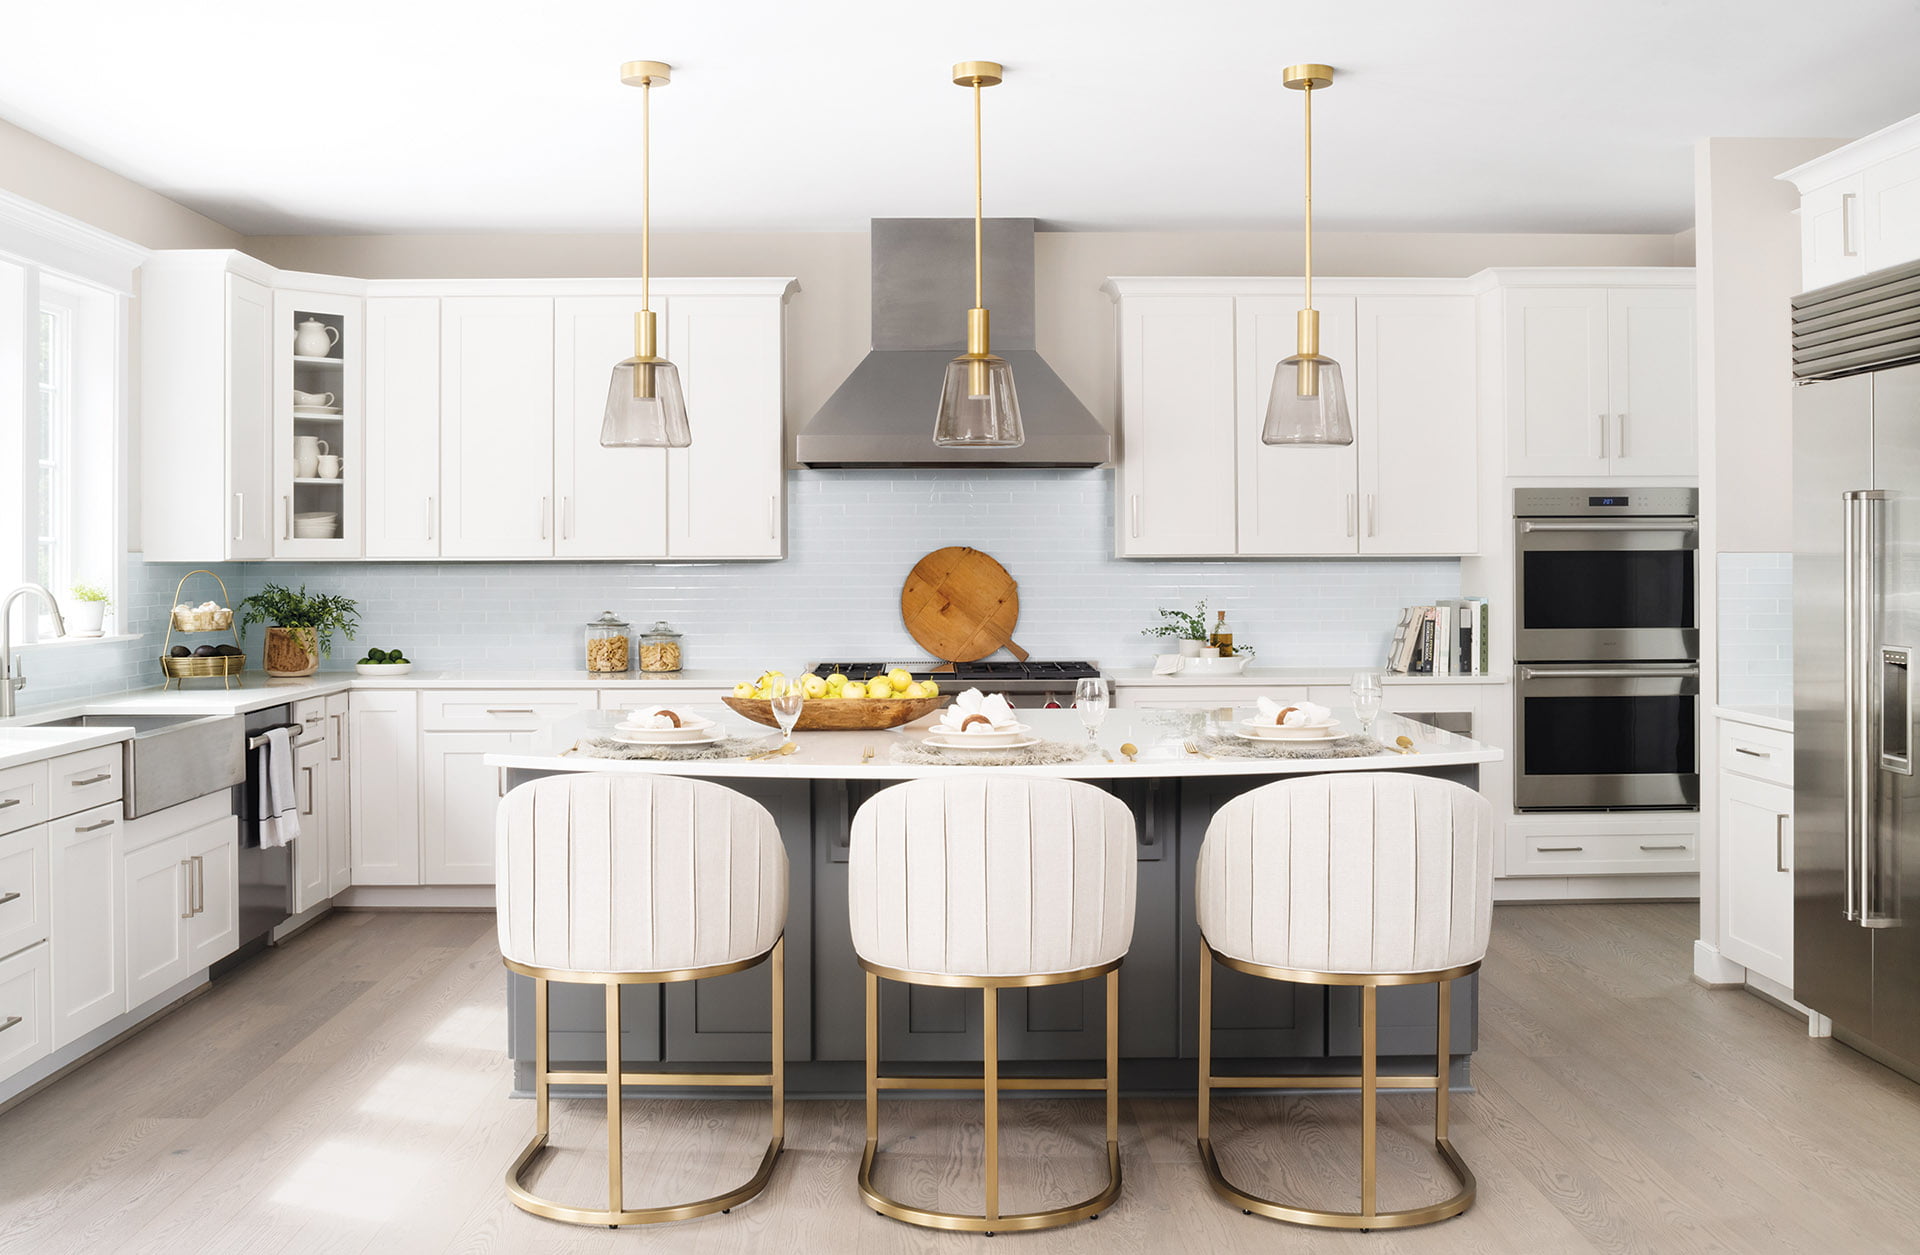 Kitchen with chic Vanguard stools and Arteriors pendants.